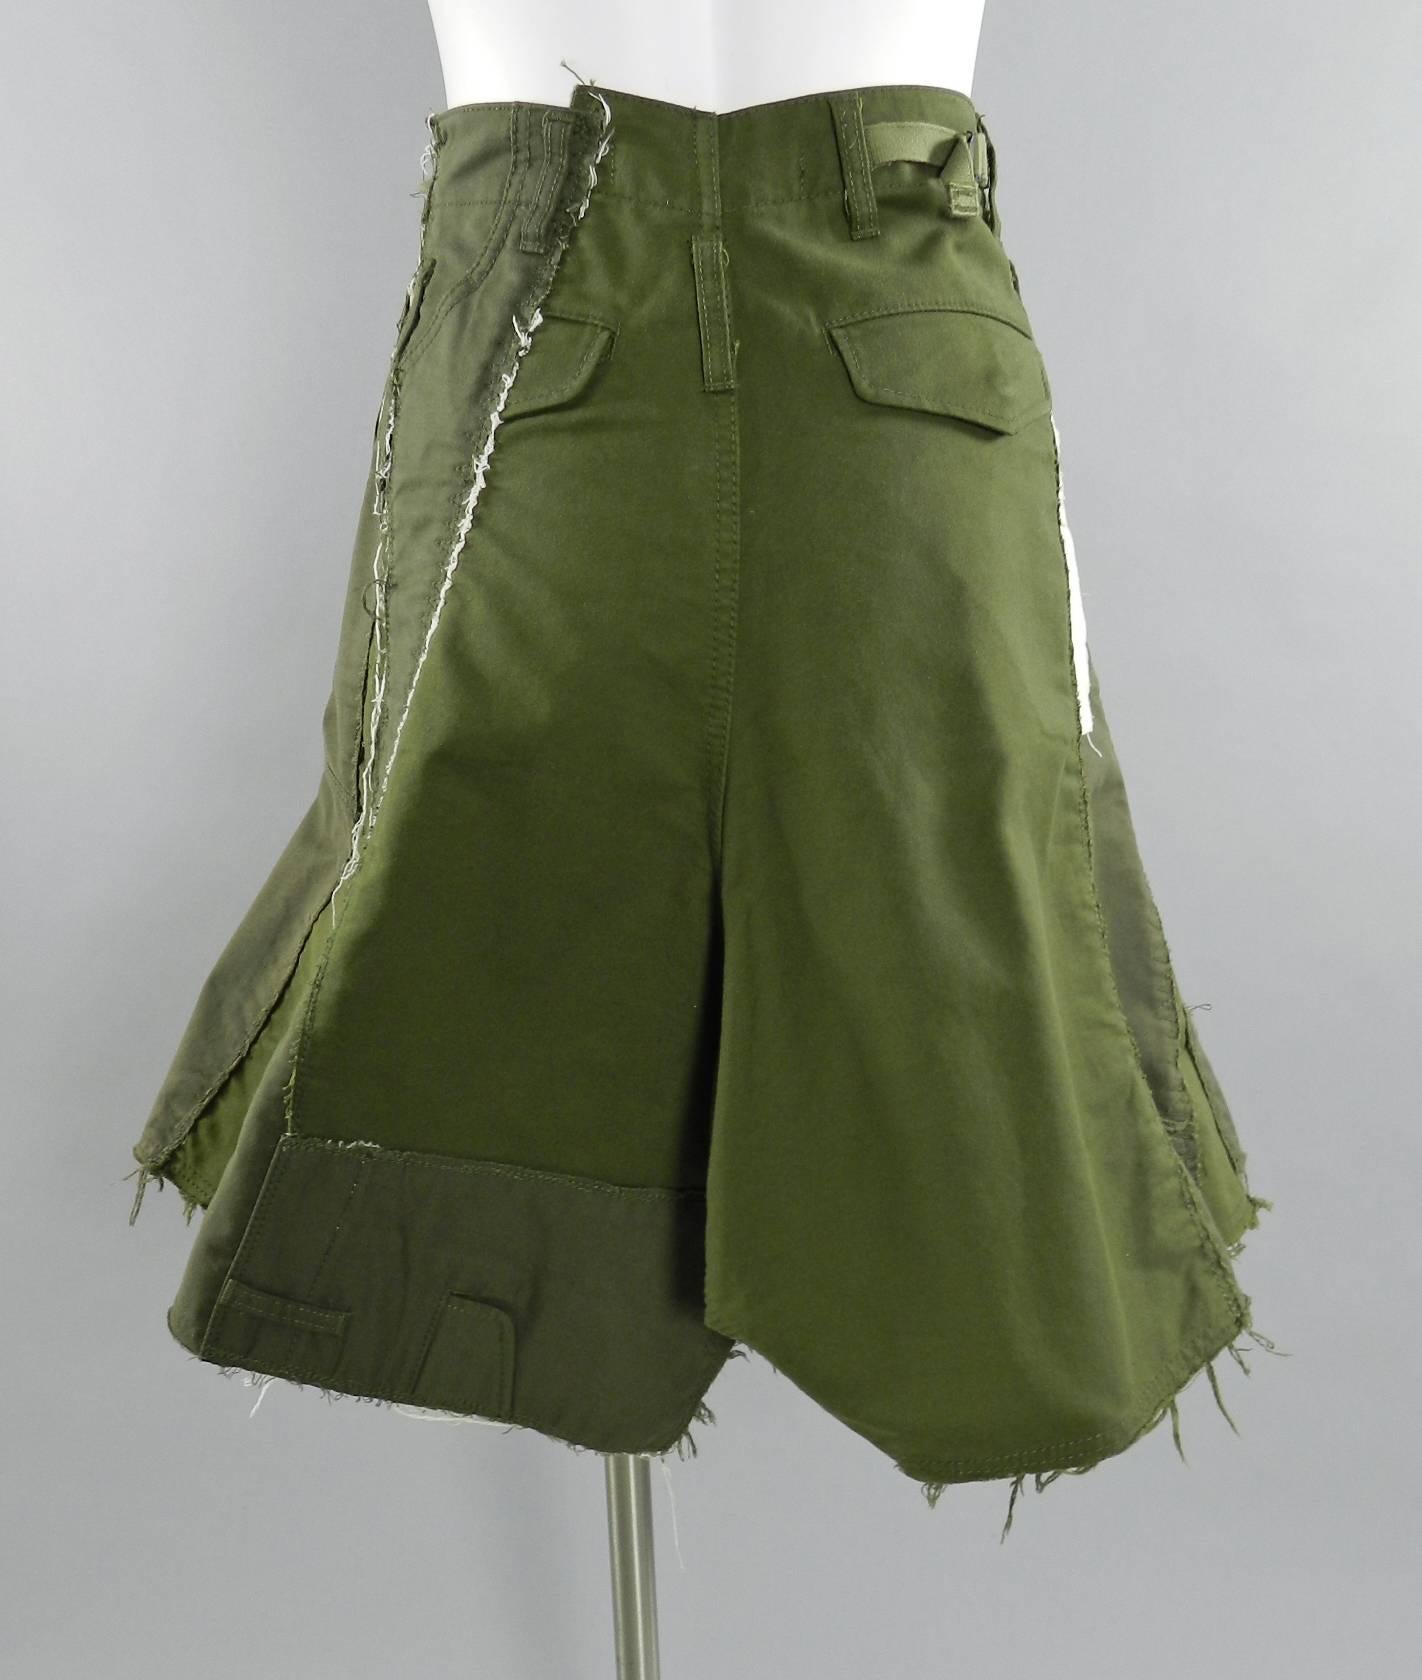 Black junya watanabe comme des garcons Deconstructed Army skirt